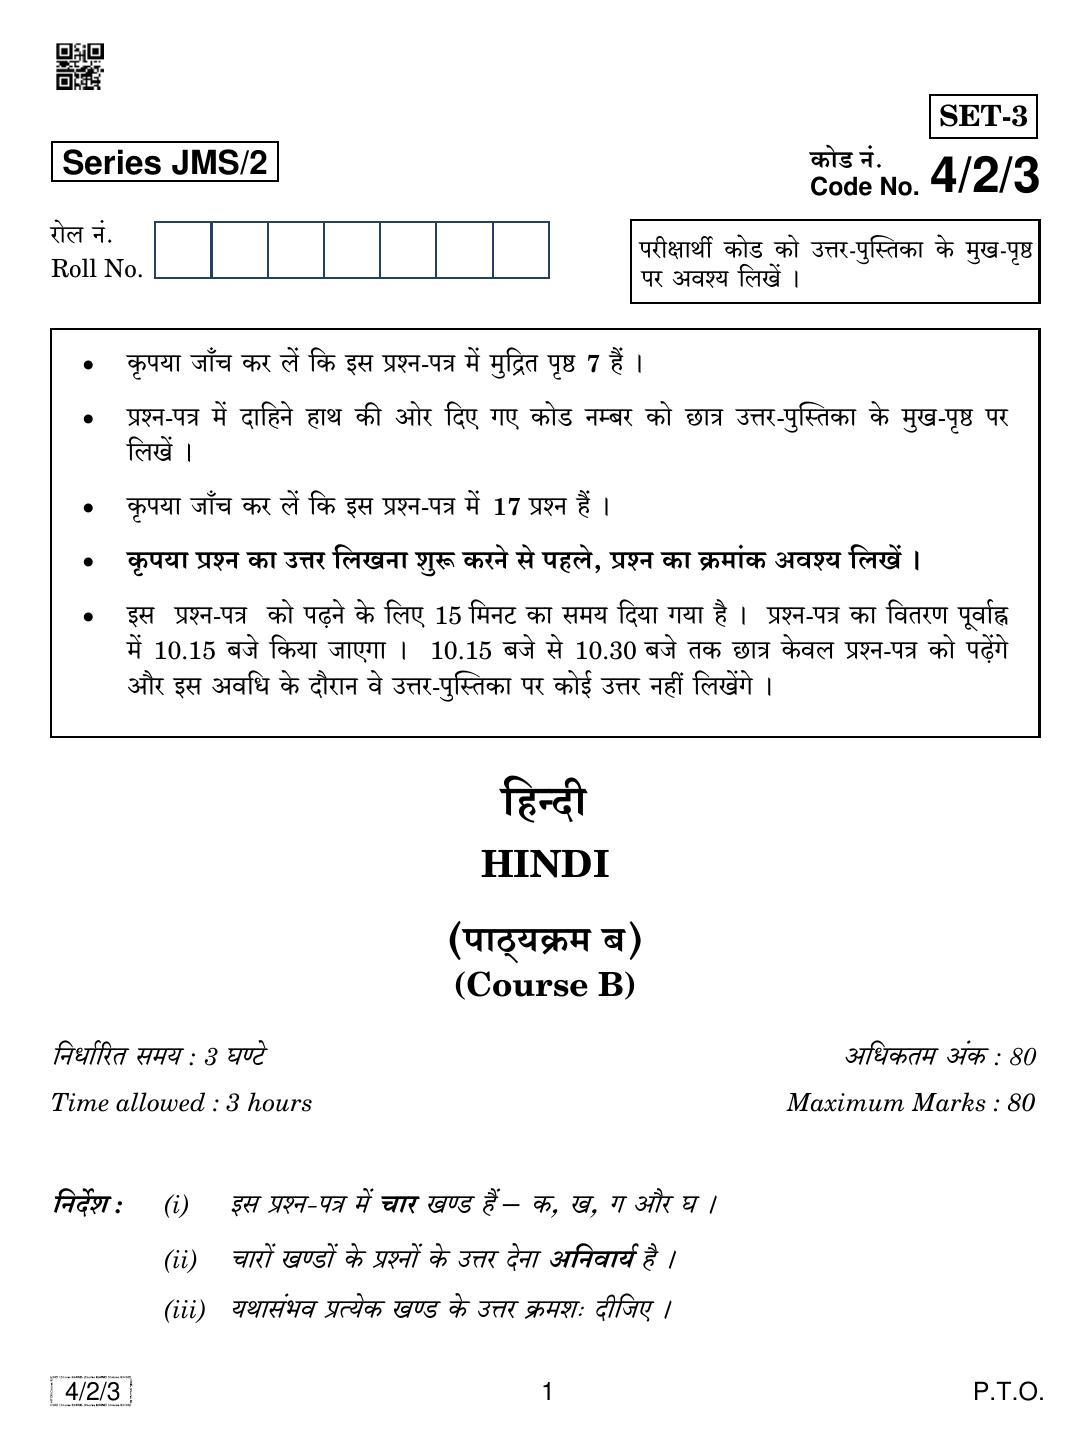 CBSE Class 10 4-2-3 HINDI COURSE- B 2019 Question Paper - Page 1